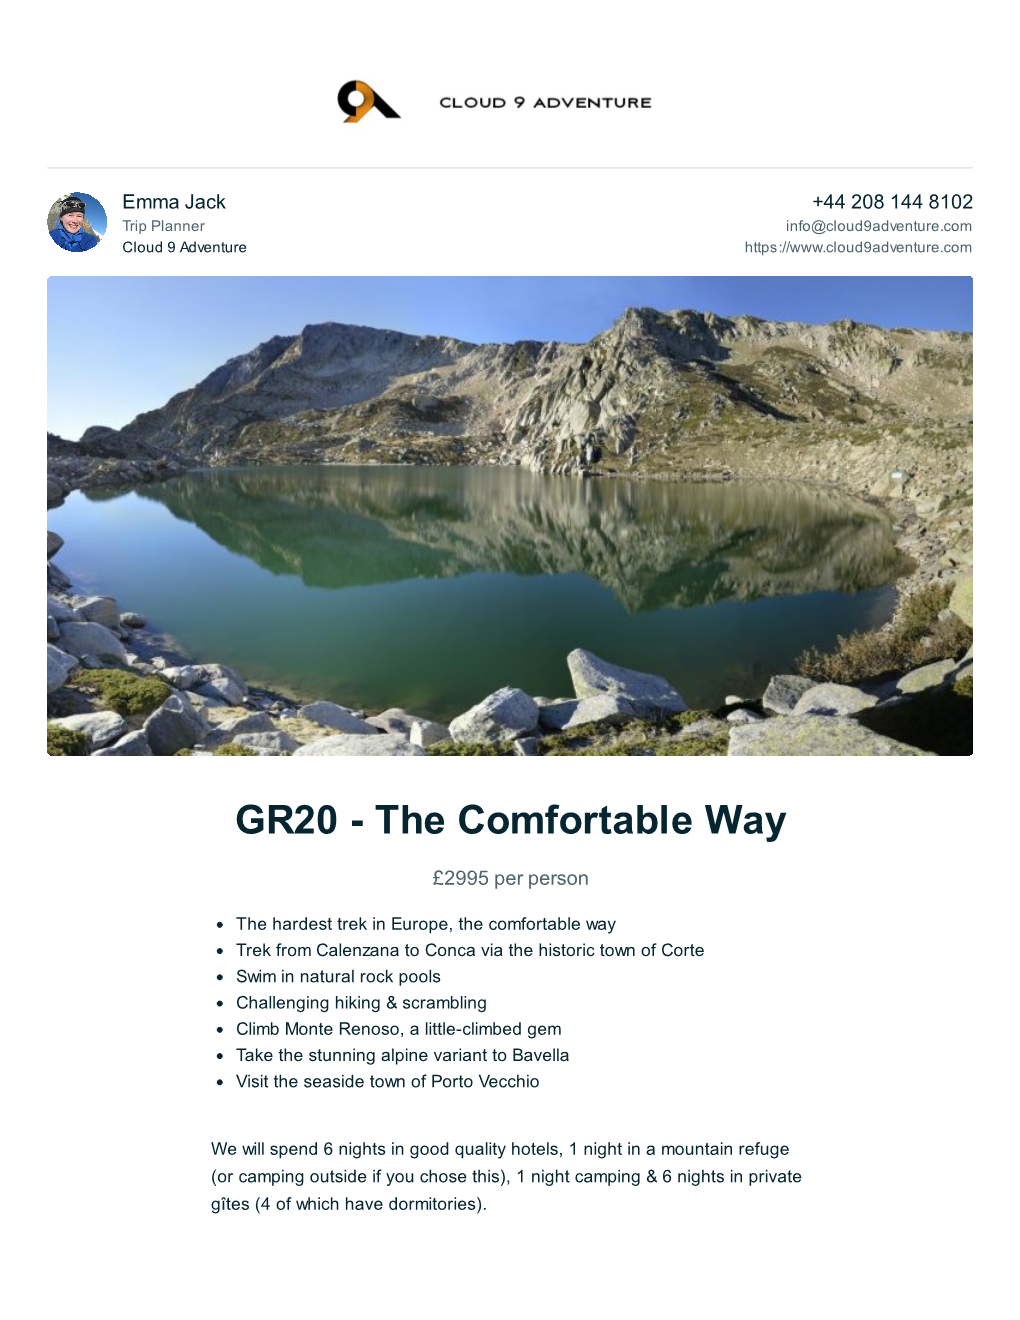 GR20 - the Comfortable Way